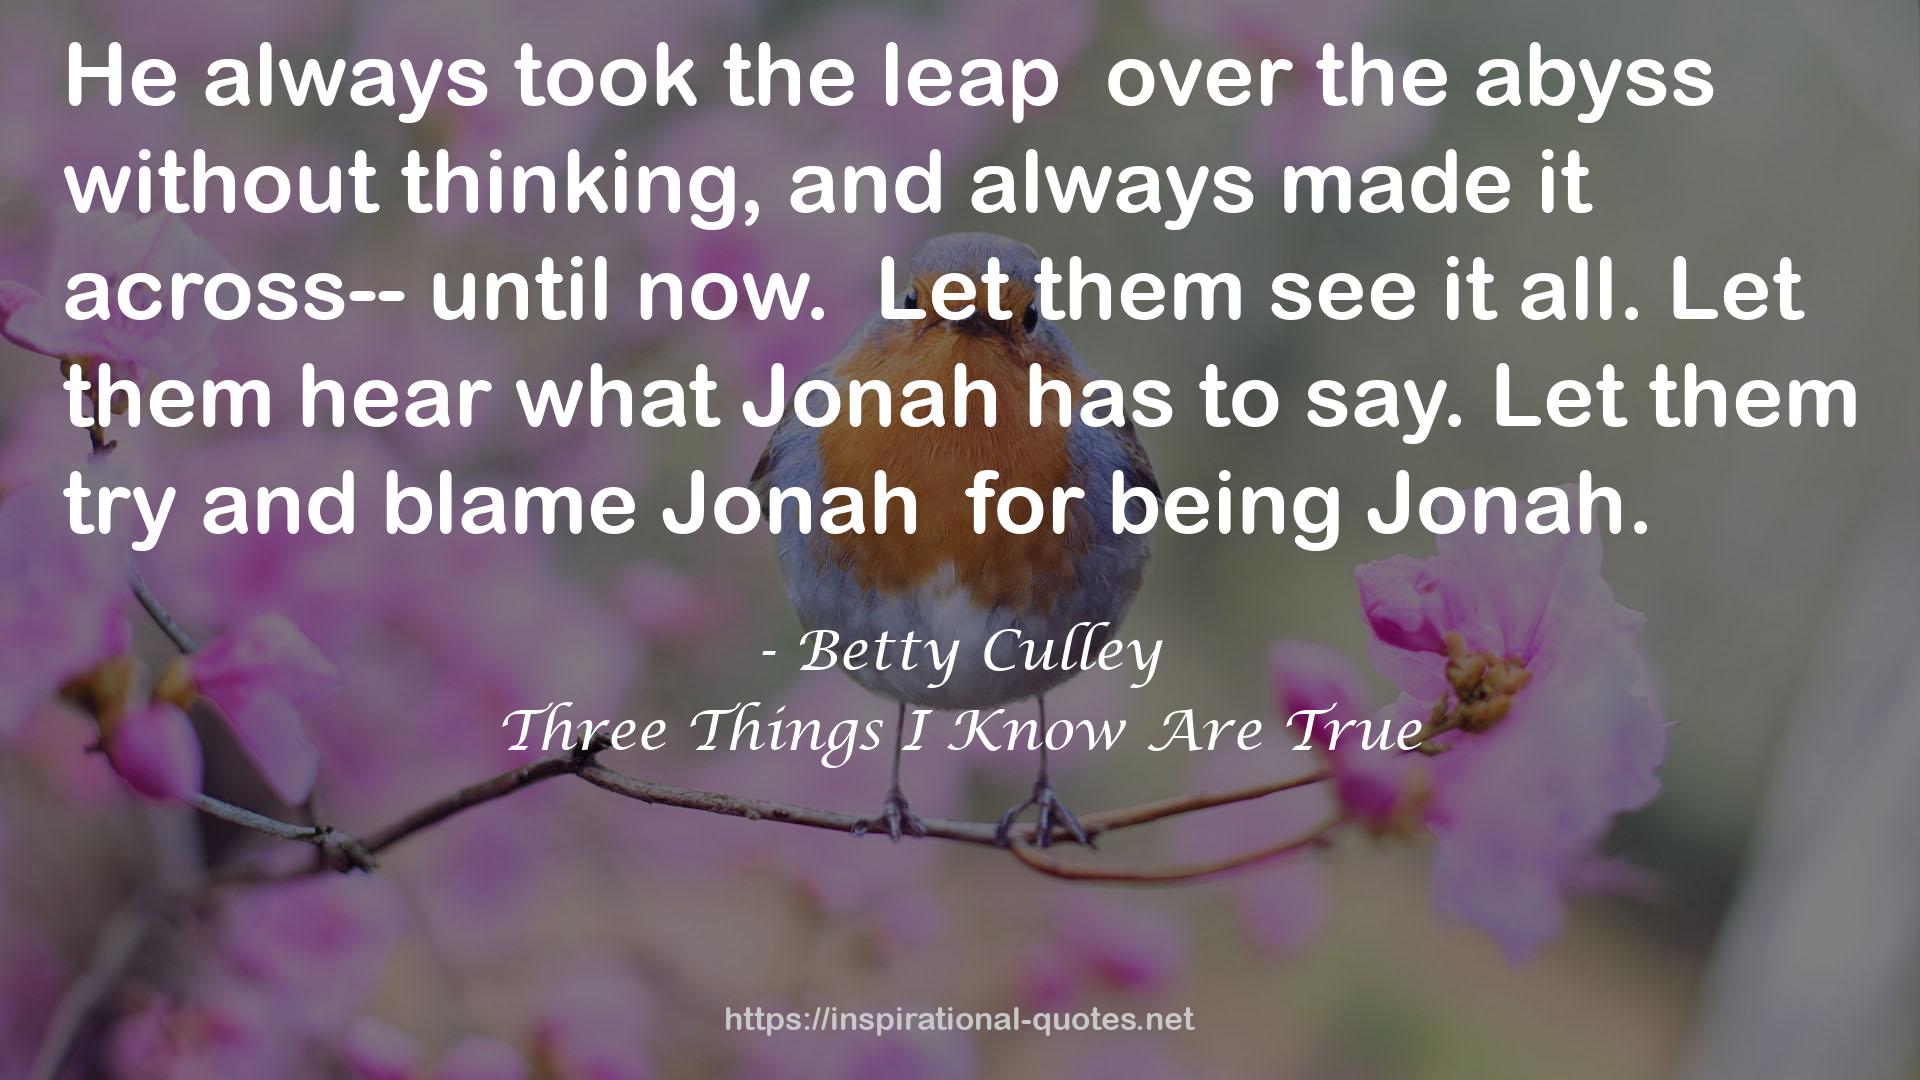 Betty Culley QUOTES